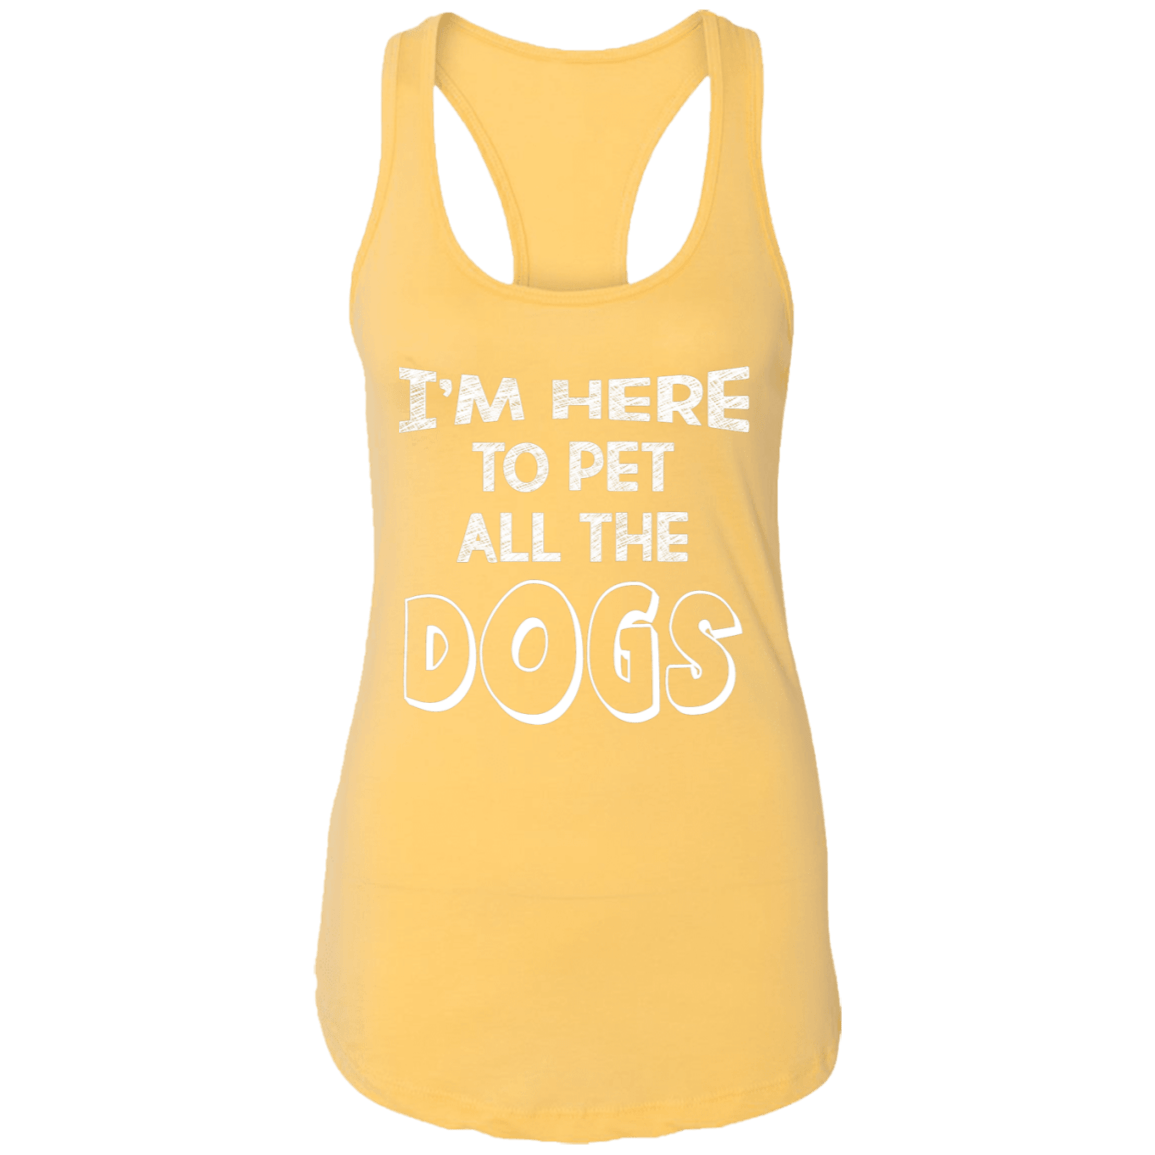 I'm Here To Pet All The Dogs - Ladies Racer Back Tank.